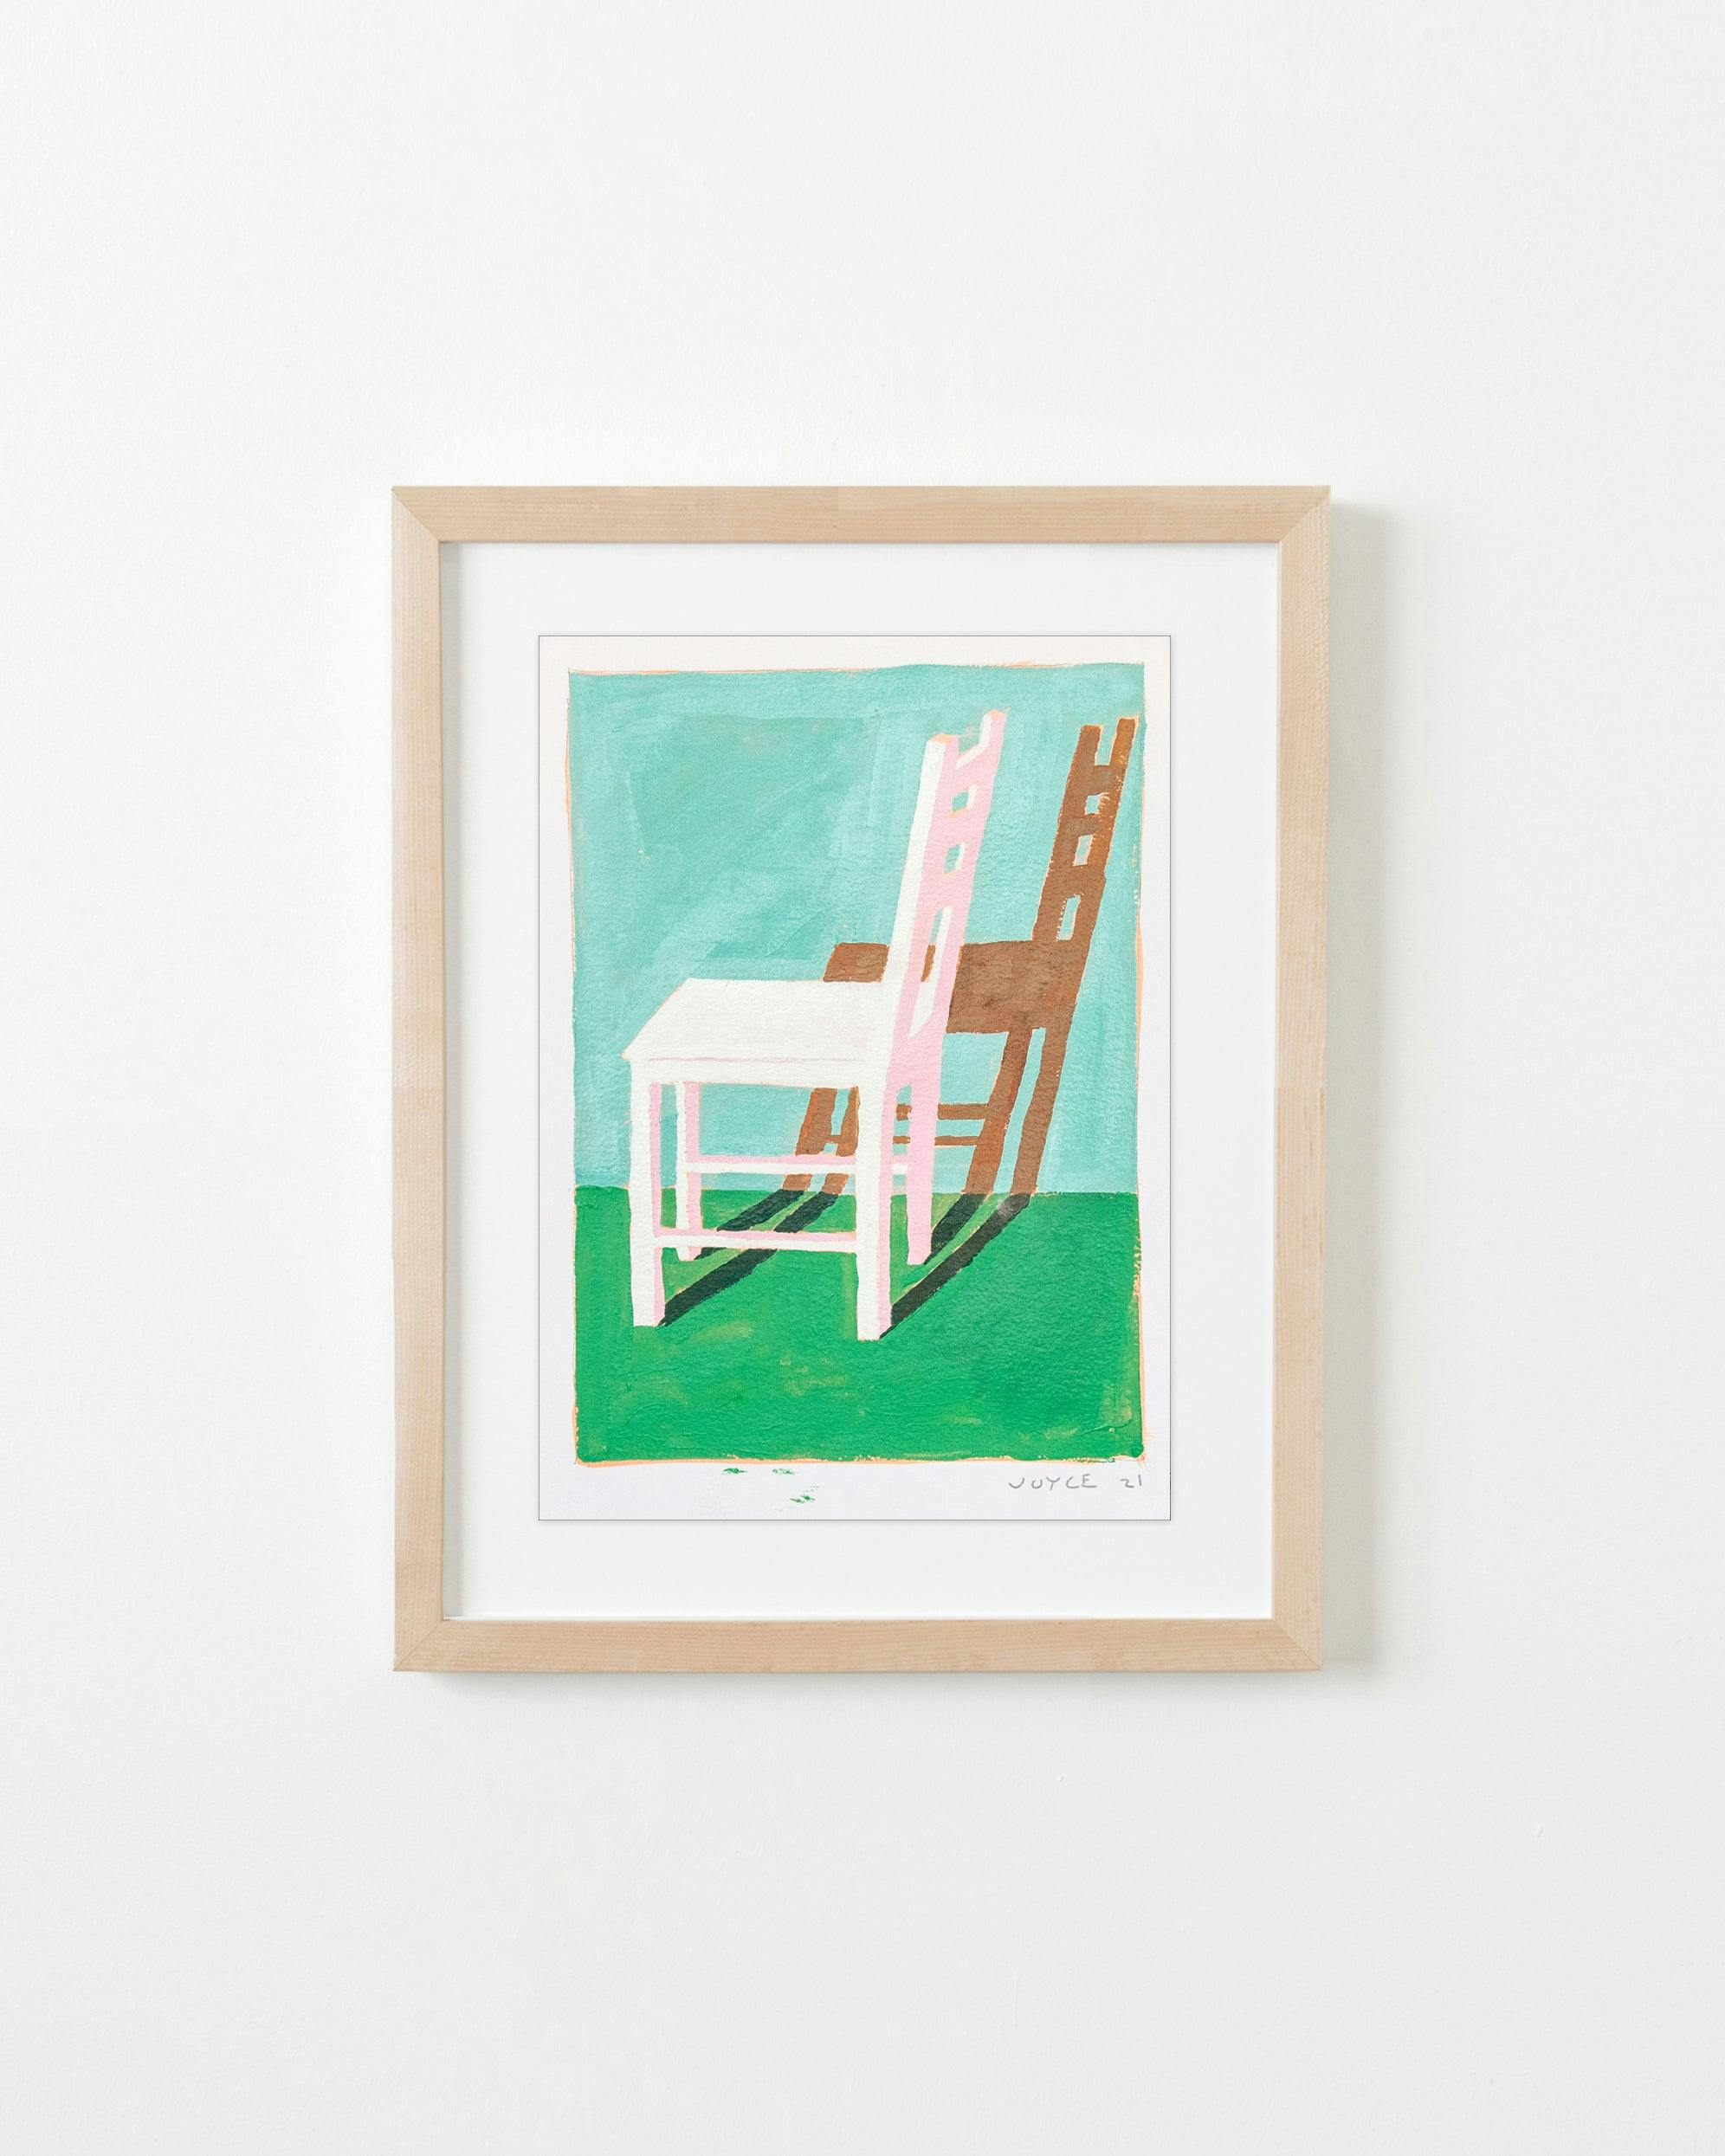 Painting by Jackson Joyce titled "Vacant Chair #4".